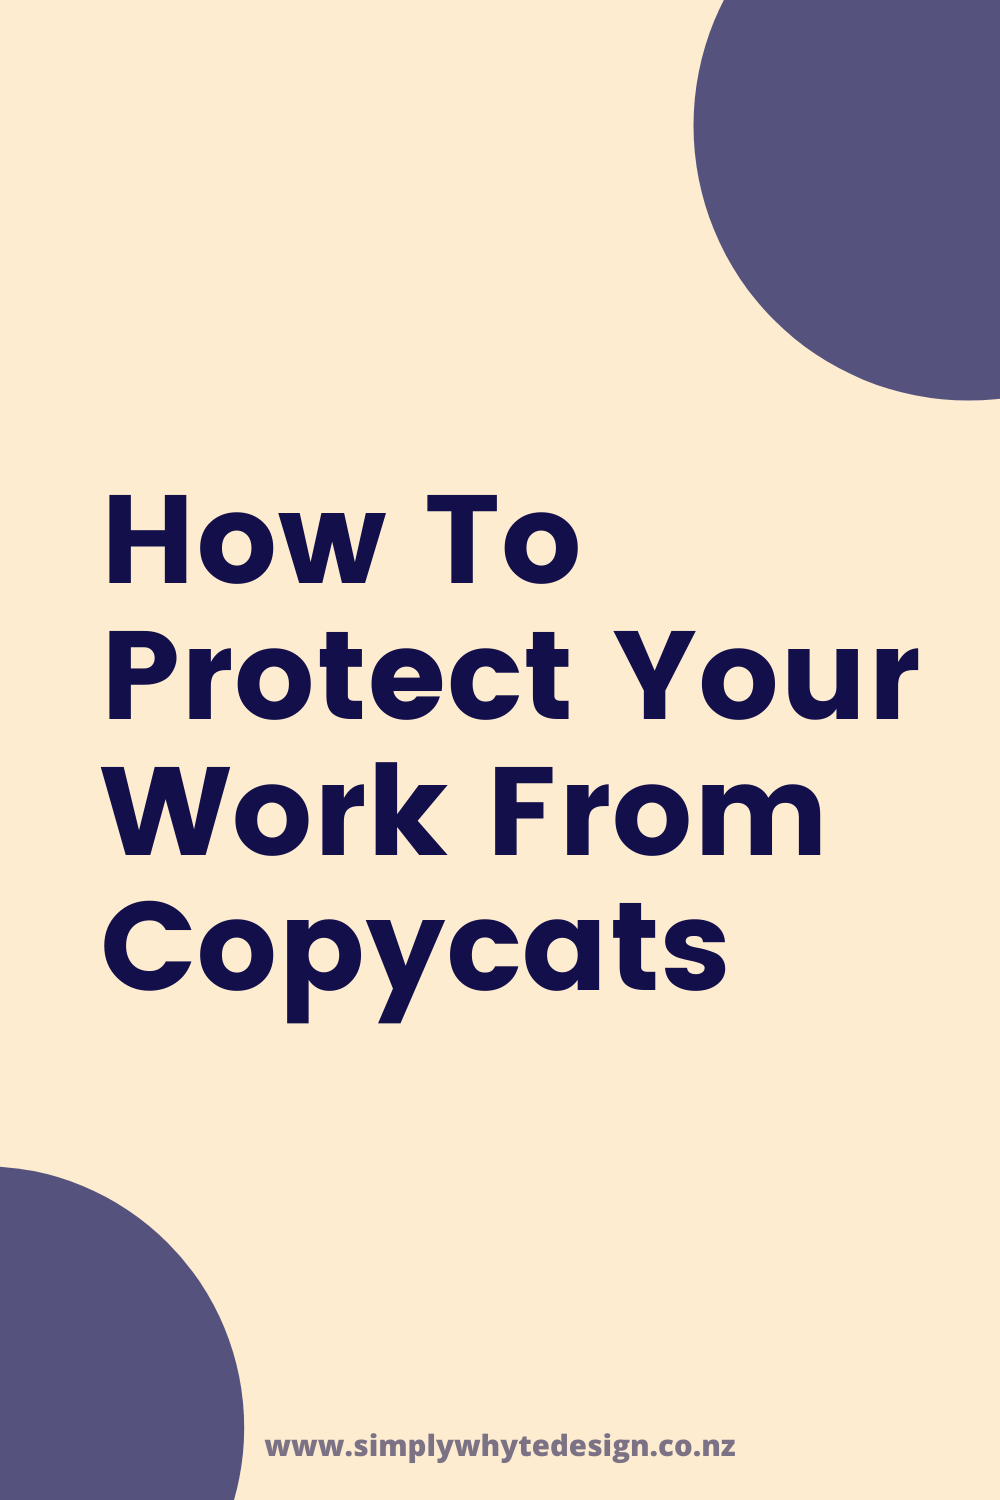 How To Protect Your Work From Copycats.png